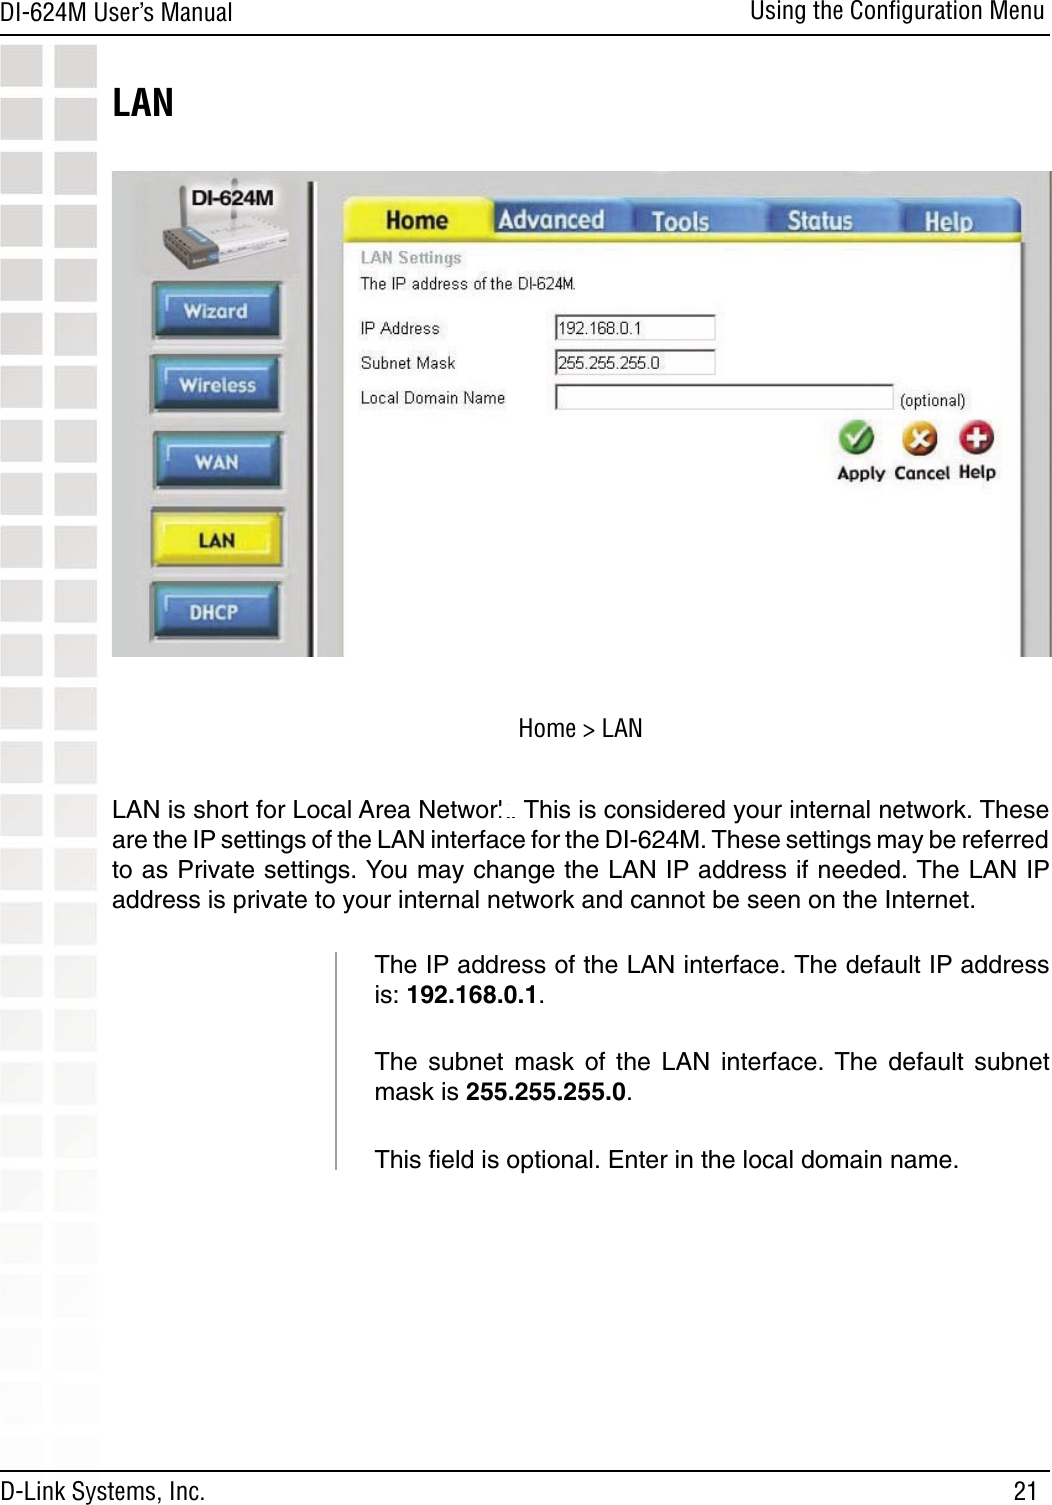 21DI-624M User’s Manual D-Link Systems, Inc.Using the Conﬁguration MenuLAN is short for Local Area Network. This is considered your internal network. These are the IP settings of the LAN interface for the DI-624M. These settings may be referred to as Private settings. You may change the LAN IP address if needed. The LAN IP address is private to your internal network and cannot be seen on the Internet.The IP address of the LAN interface. The default IP address is: 192.168.0.1.The  subnet  mask  of  the  LAN  interface.  The  default  subnet mask is 255.255.255.0.This ﬁeld is optional. Enter in the local domain name.LANHome &gt; LAN